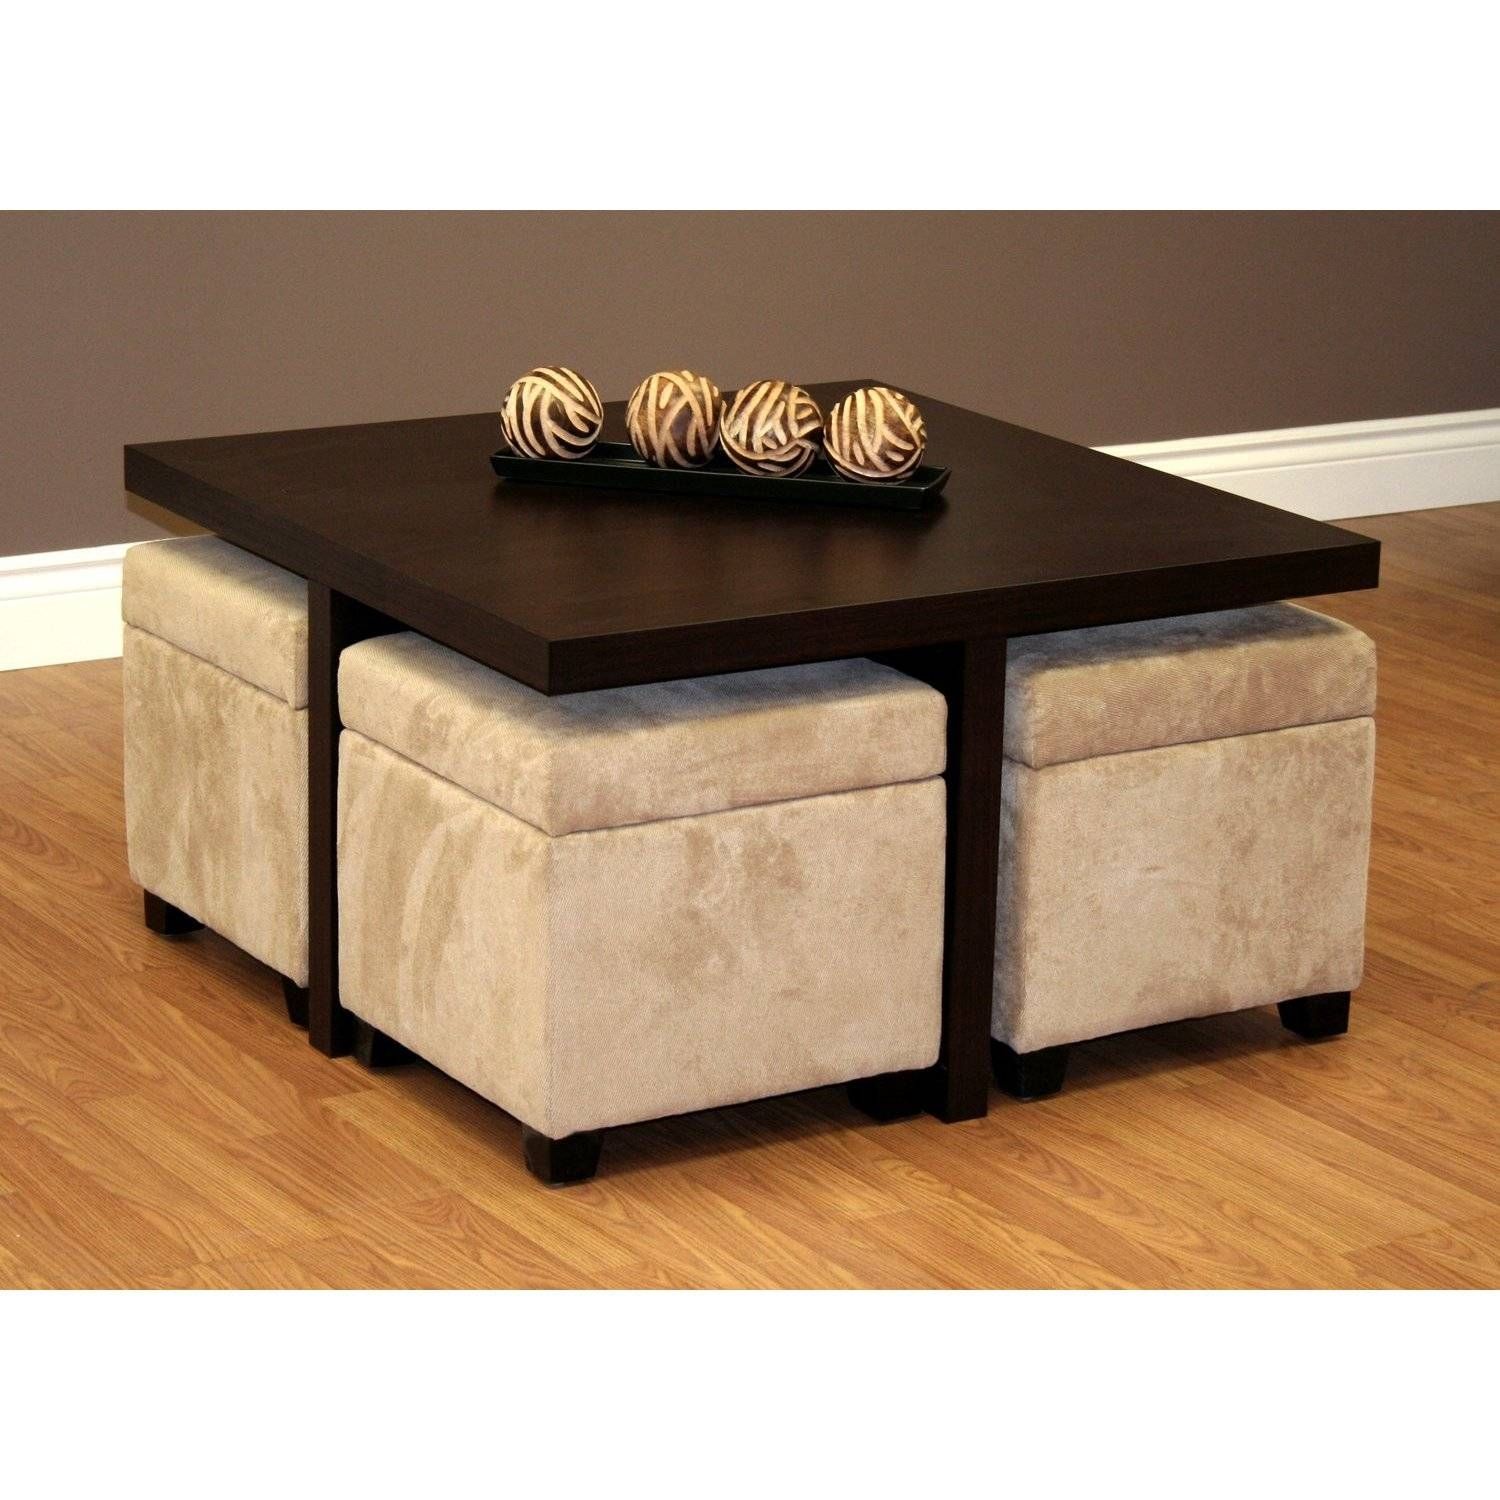 Furniture: Luxury Coffee Table With Stools For Living Room Within Square Wood Coffee Tables With Storage (View 18 of 30)